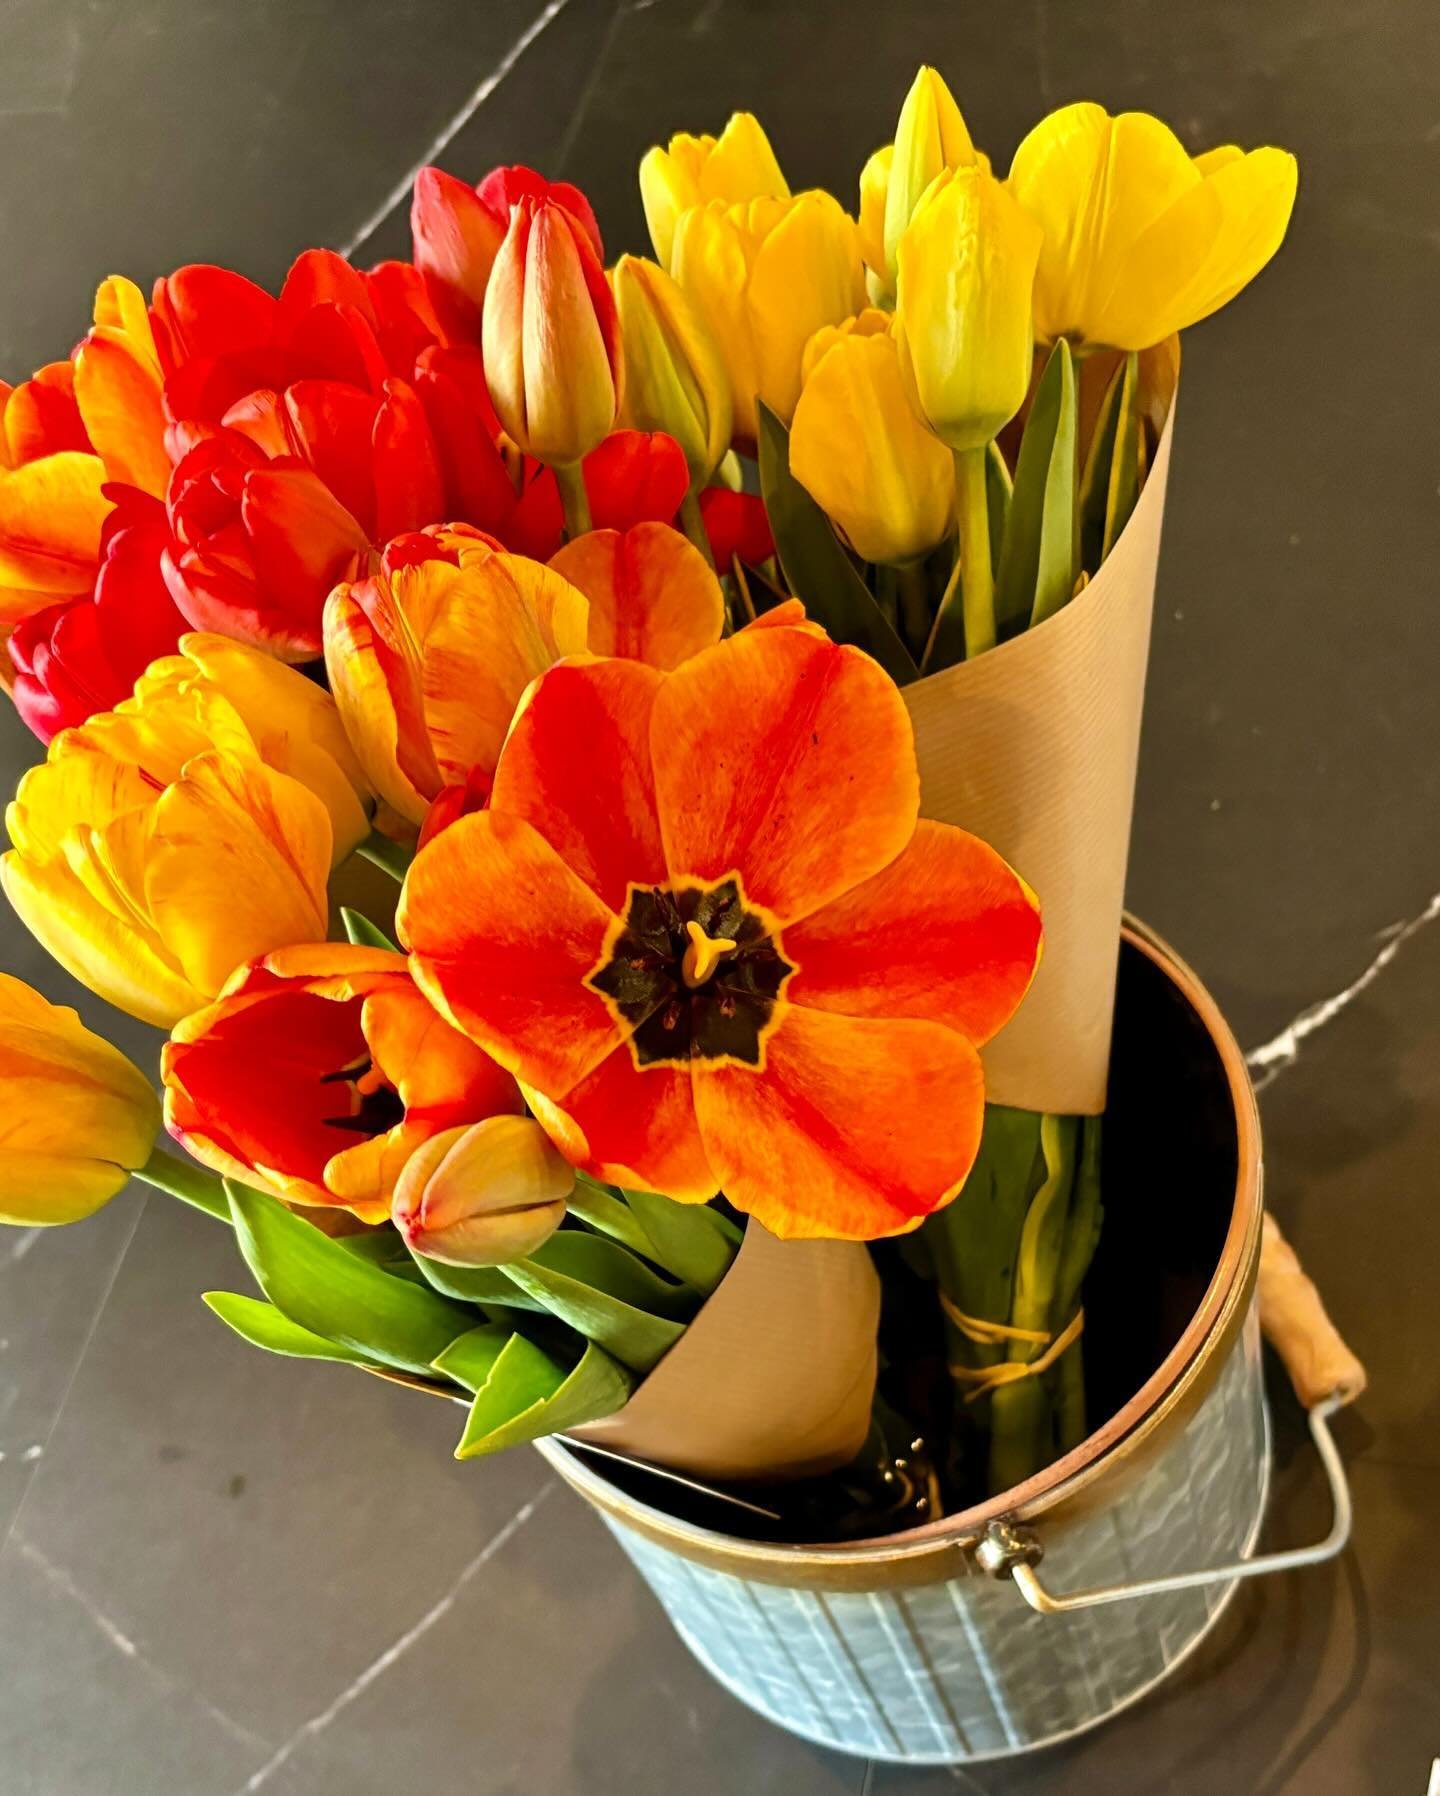 It's spring at @murphys.bistro! Come and get your own bunch of spring tulips fresh from the patch.